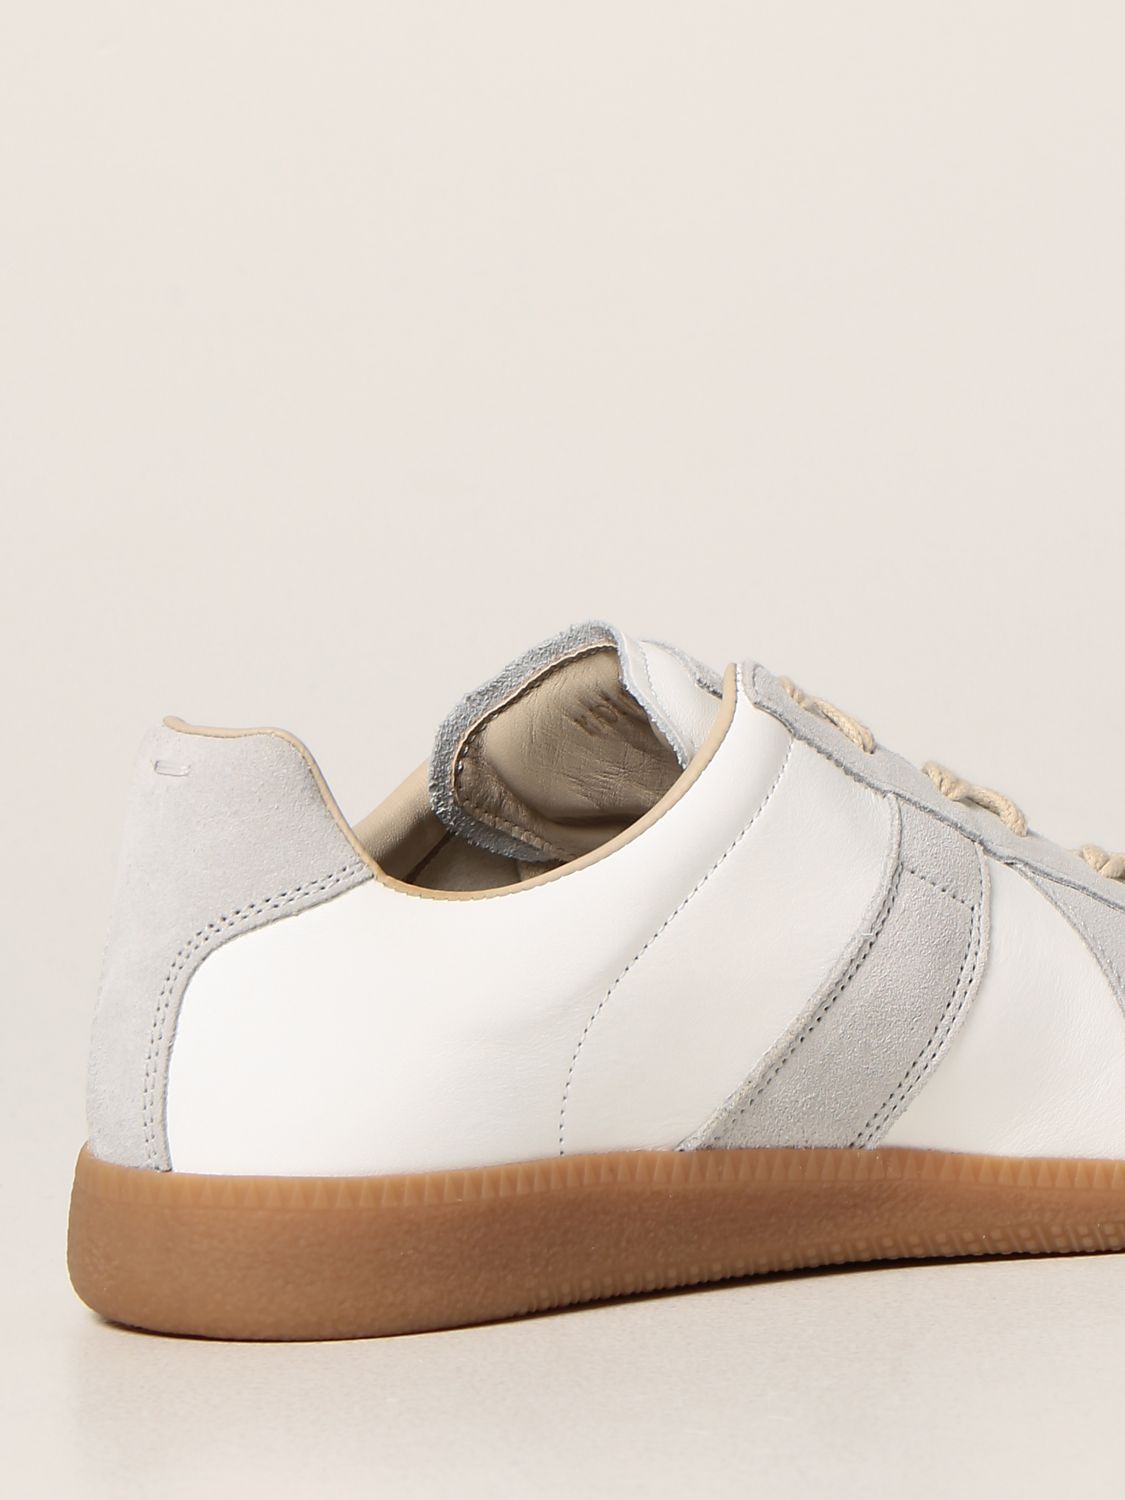 MAISON MARGIELA: Replica suede and leather sneakers - White | Maison ...